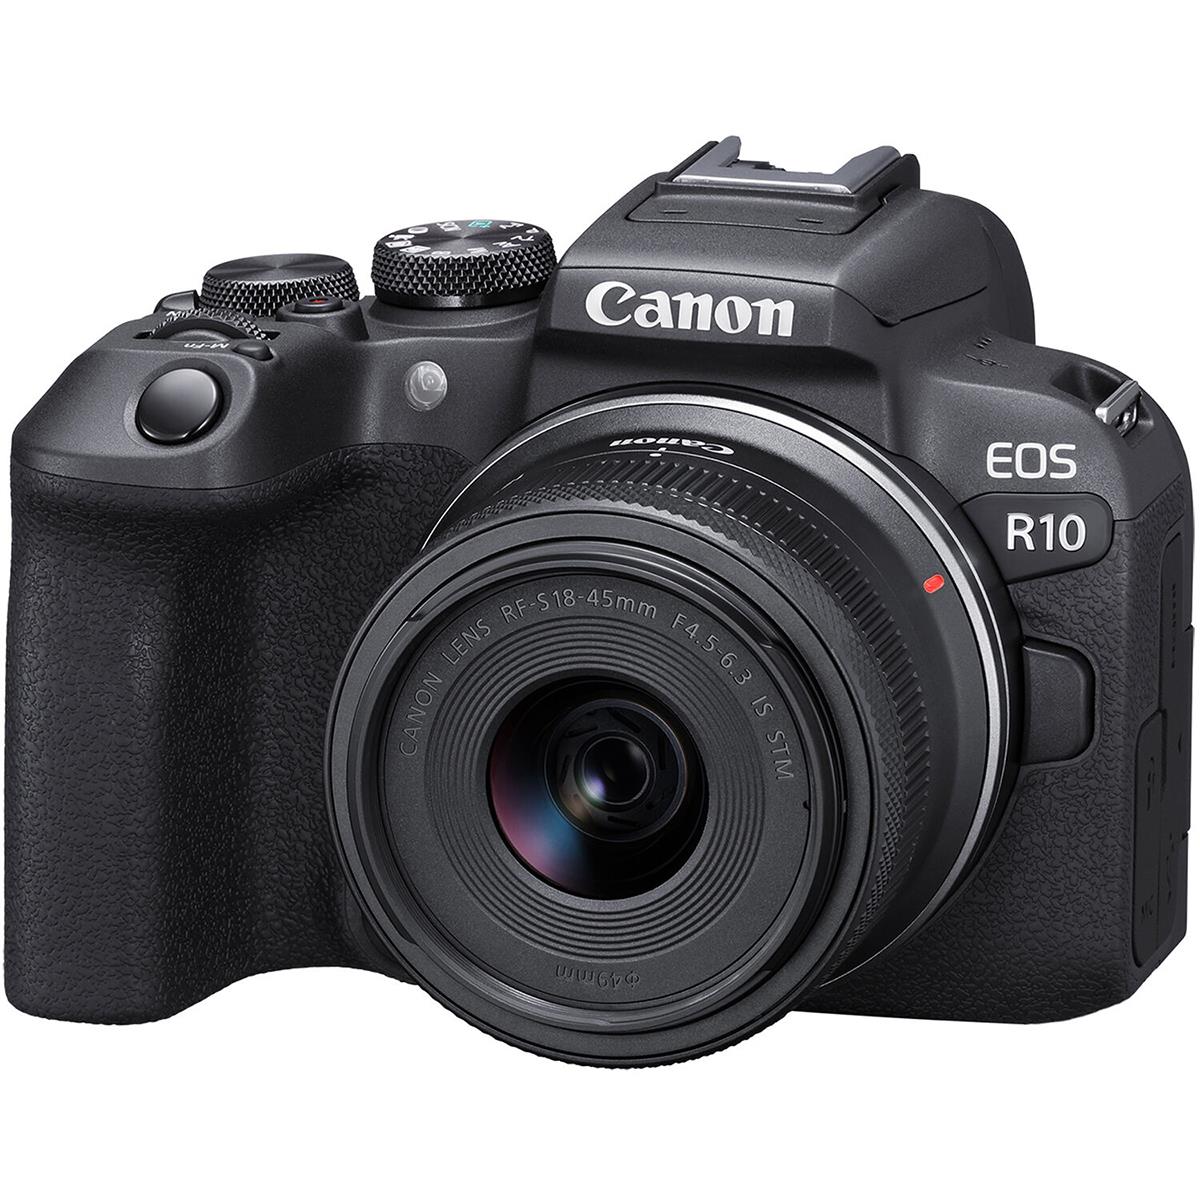 Canon EOS R10 Mirrorless Digital Camera with RF-S 18-45mm f/4.5-6.3 IS STM Lens